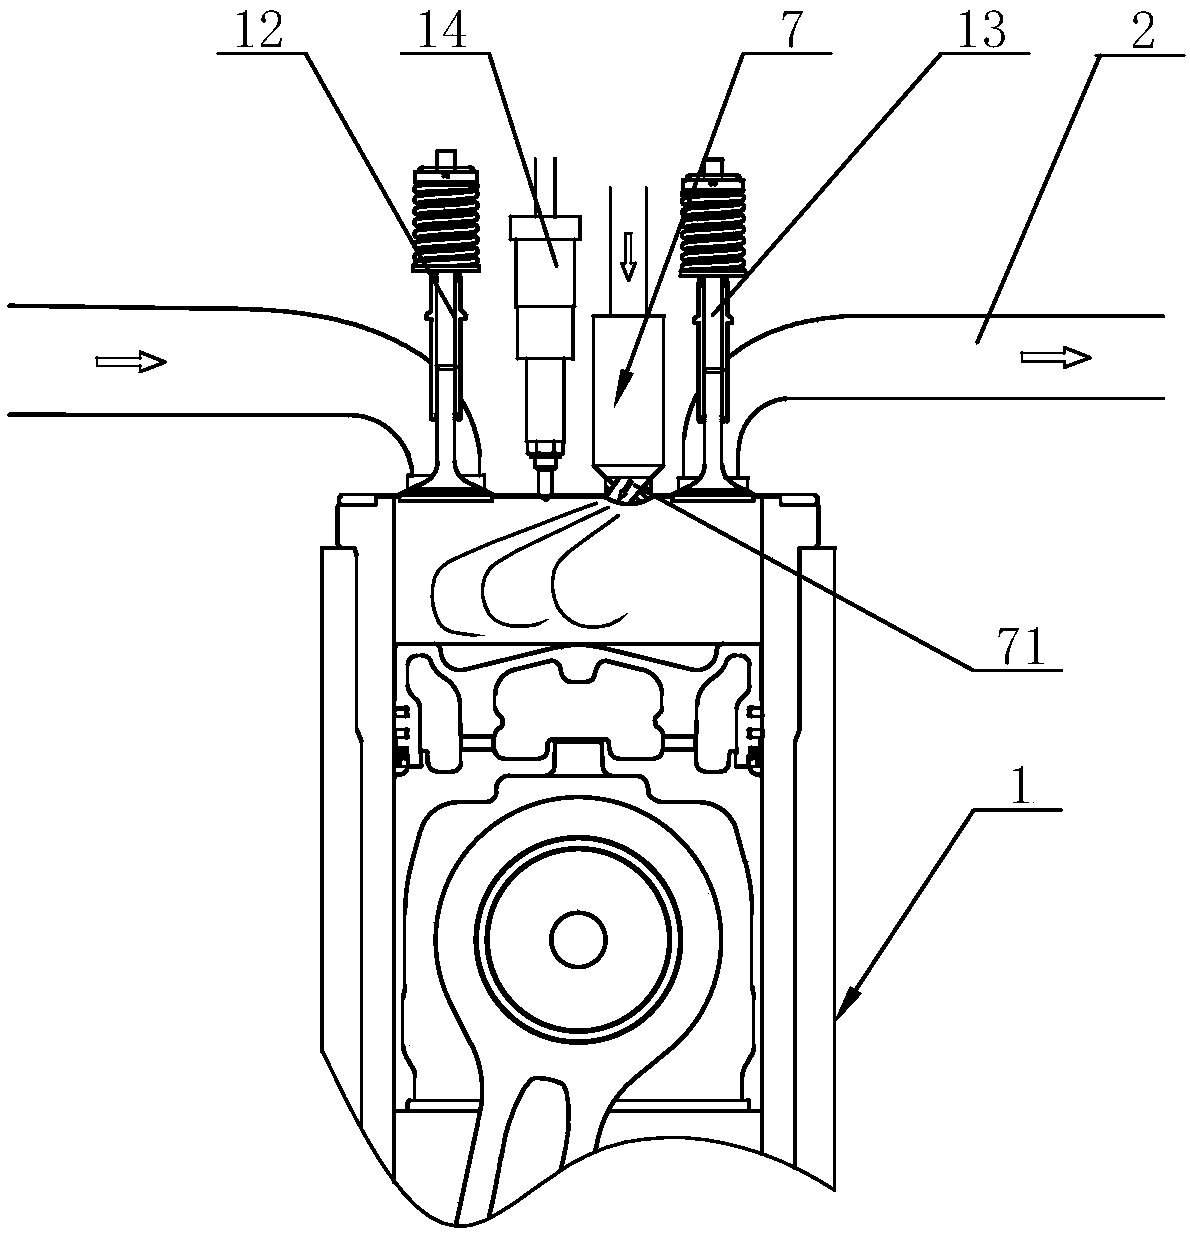 Waste gas cylinder inner direct injection turbulent combustion system and method